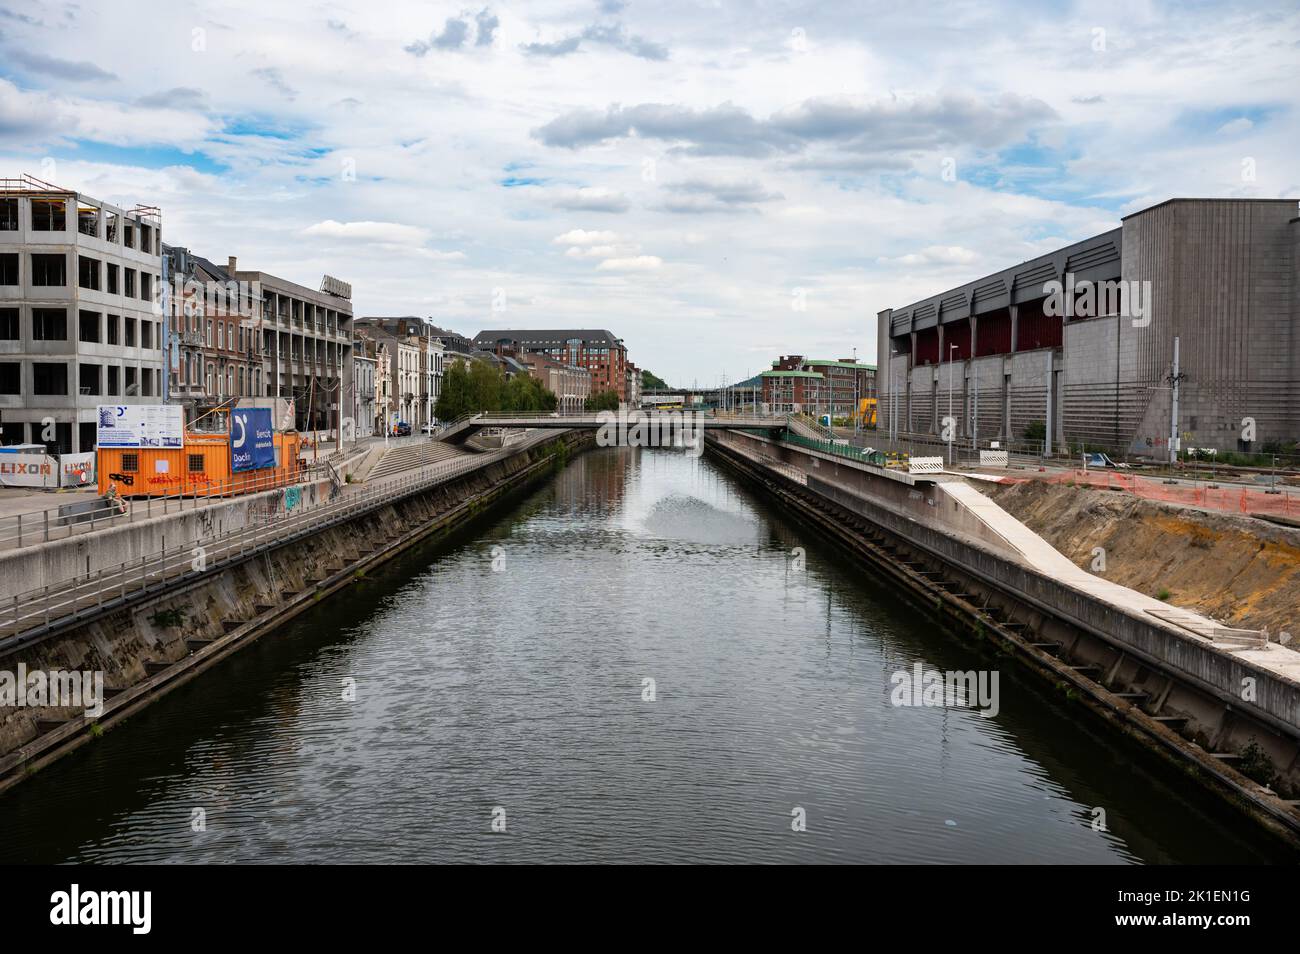 Charleroi, Wallon Region, Belgium - 08 01 2022 - Banks of the sea canal in renovation with road works Stock Photo